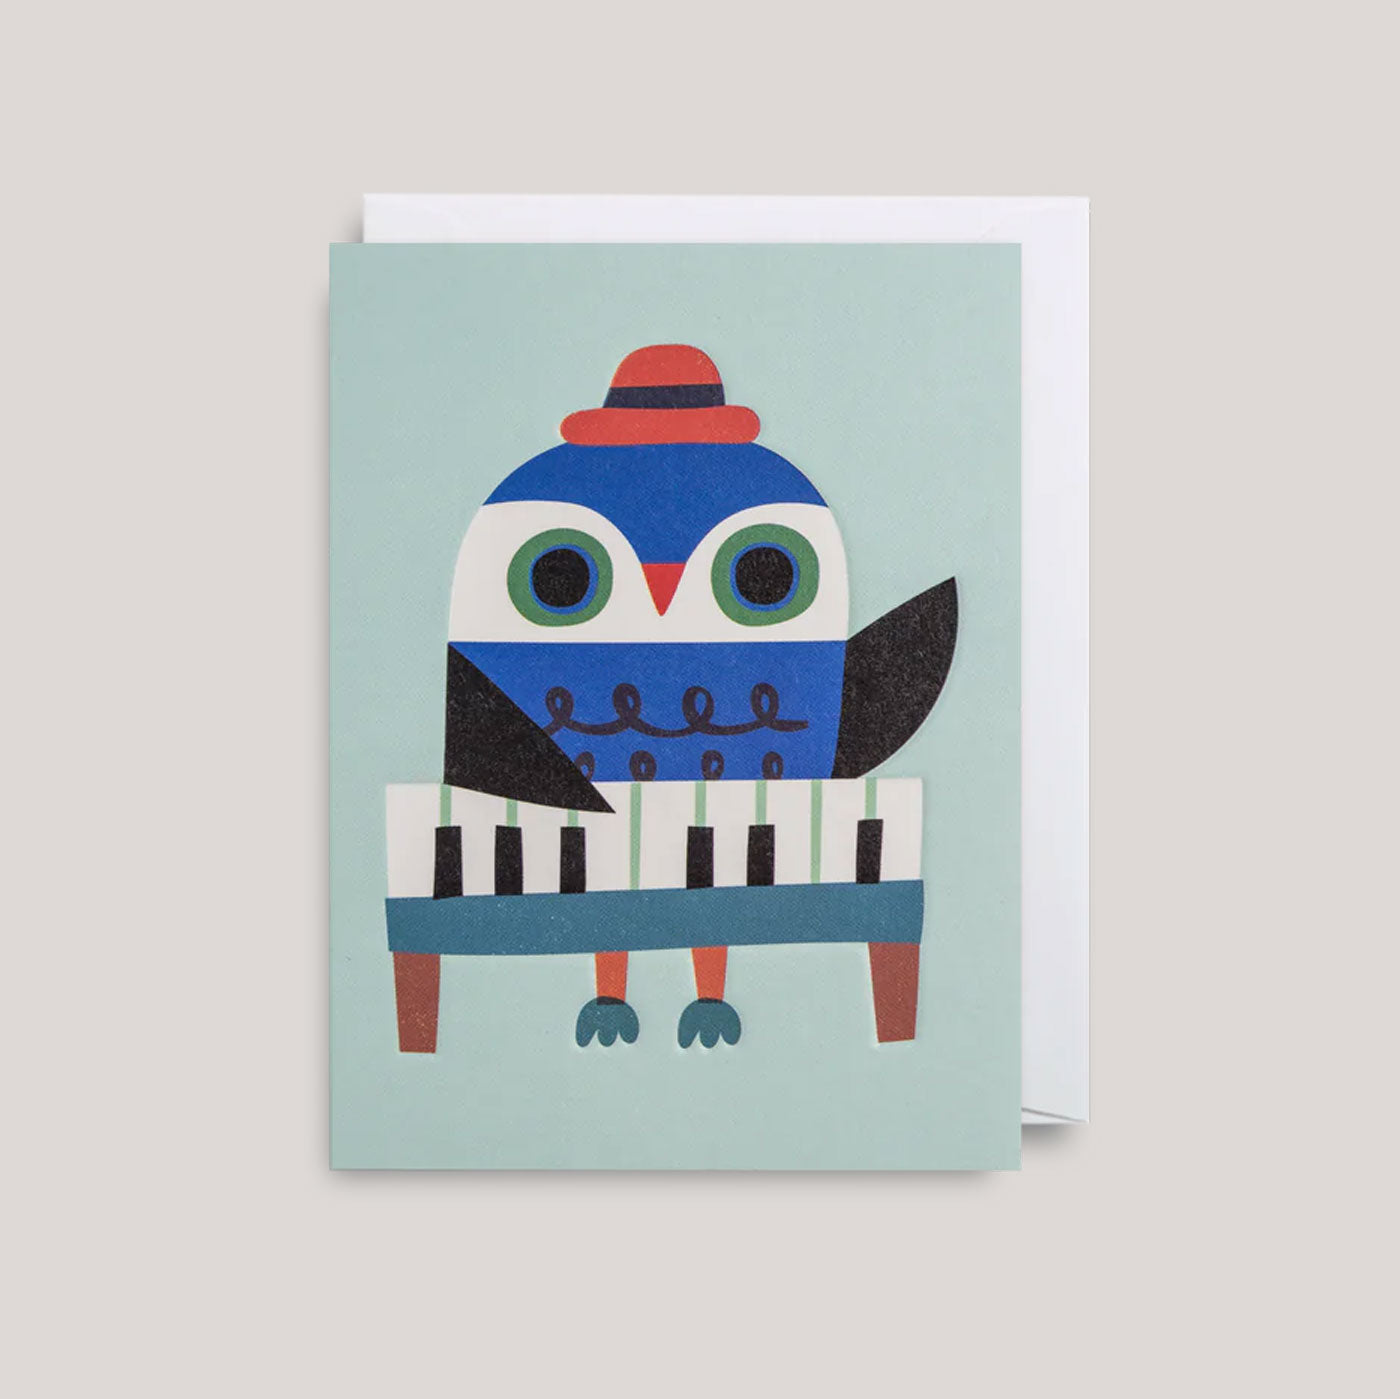 Piano Owl by Hsinping Pan for Lagom